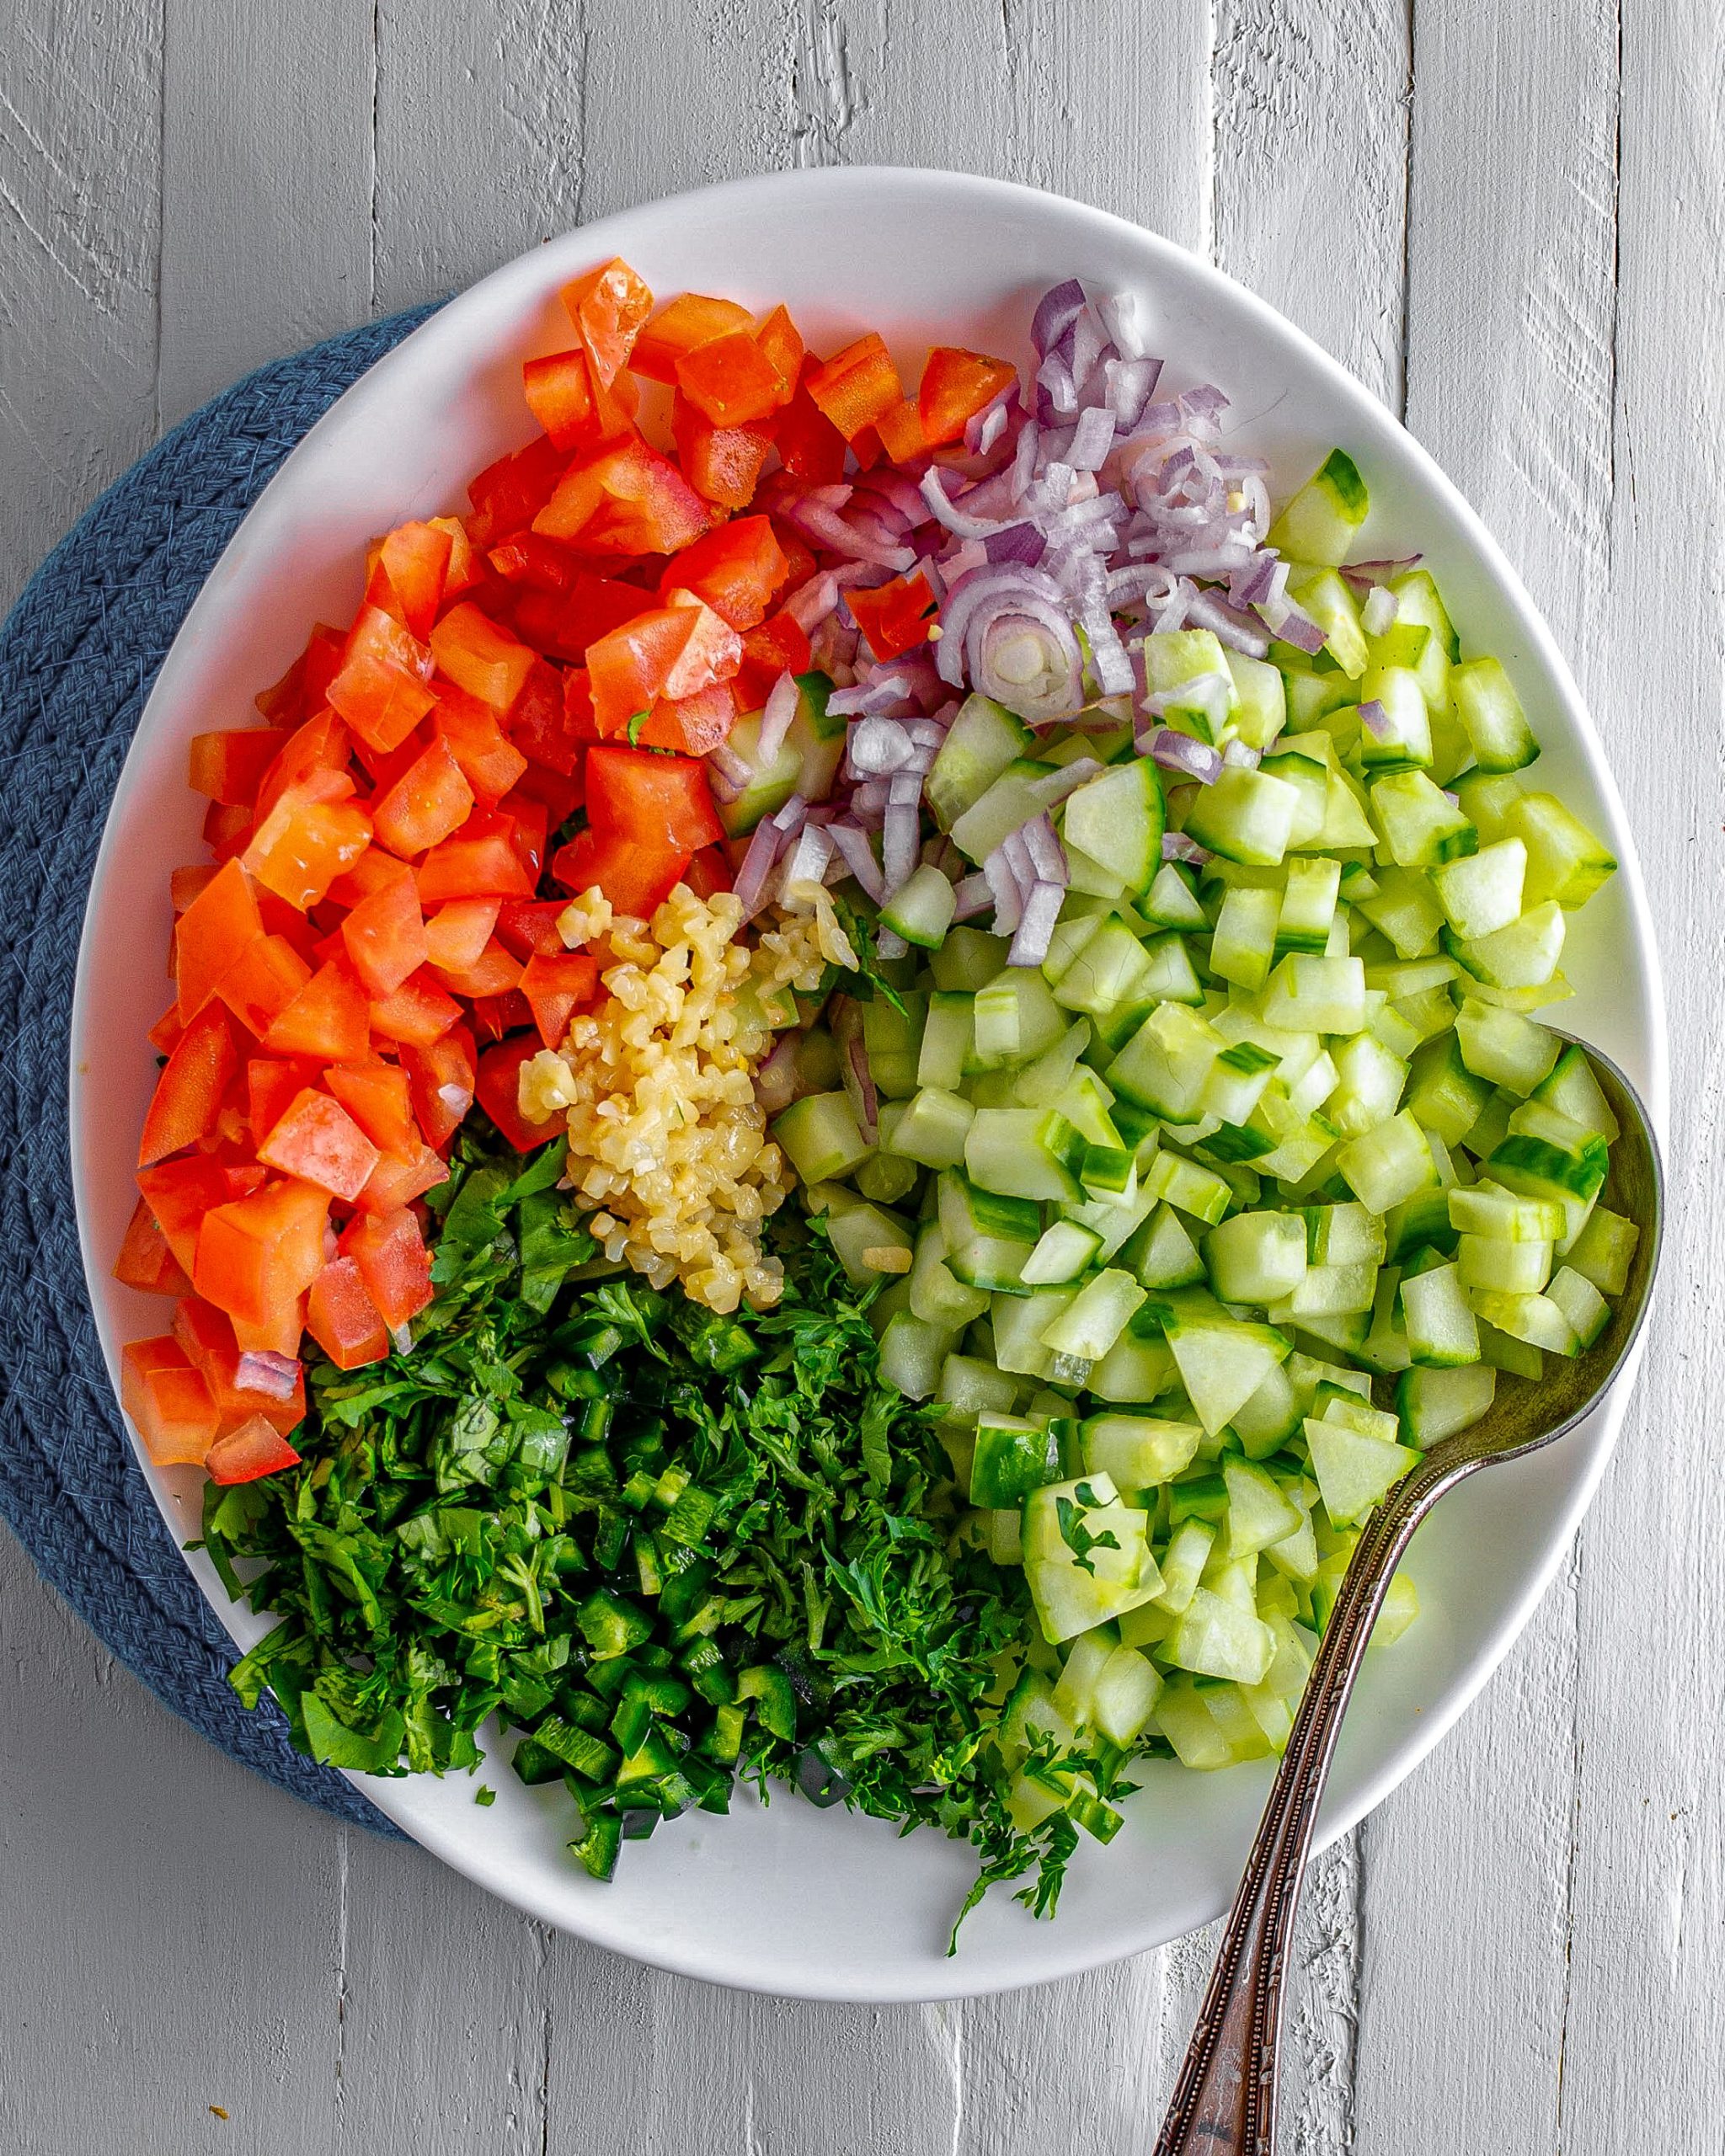 In a larger mixing bowl, mix together the ingredients for the salsa. 